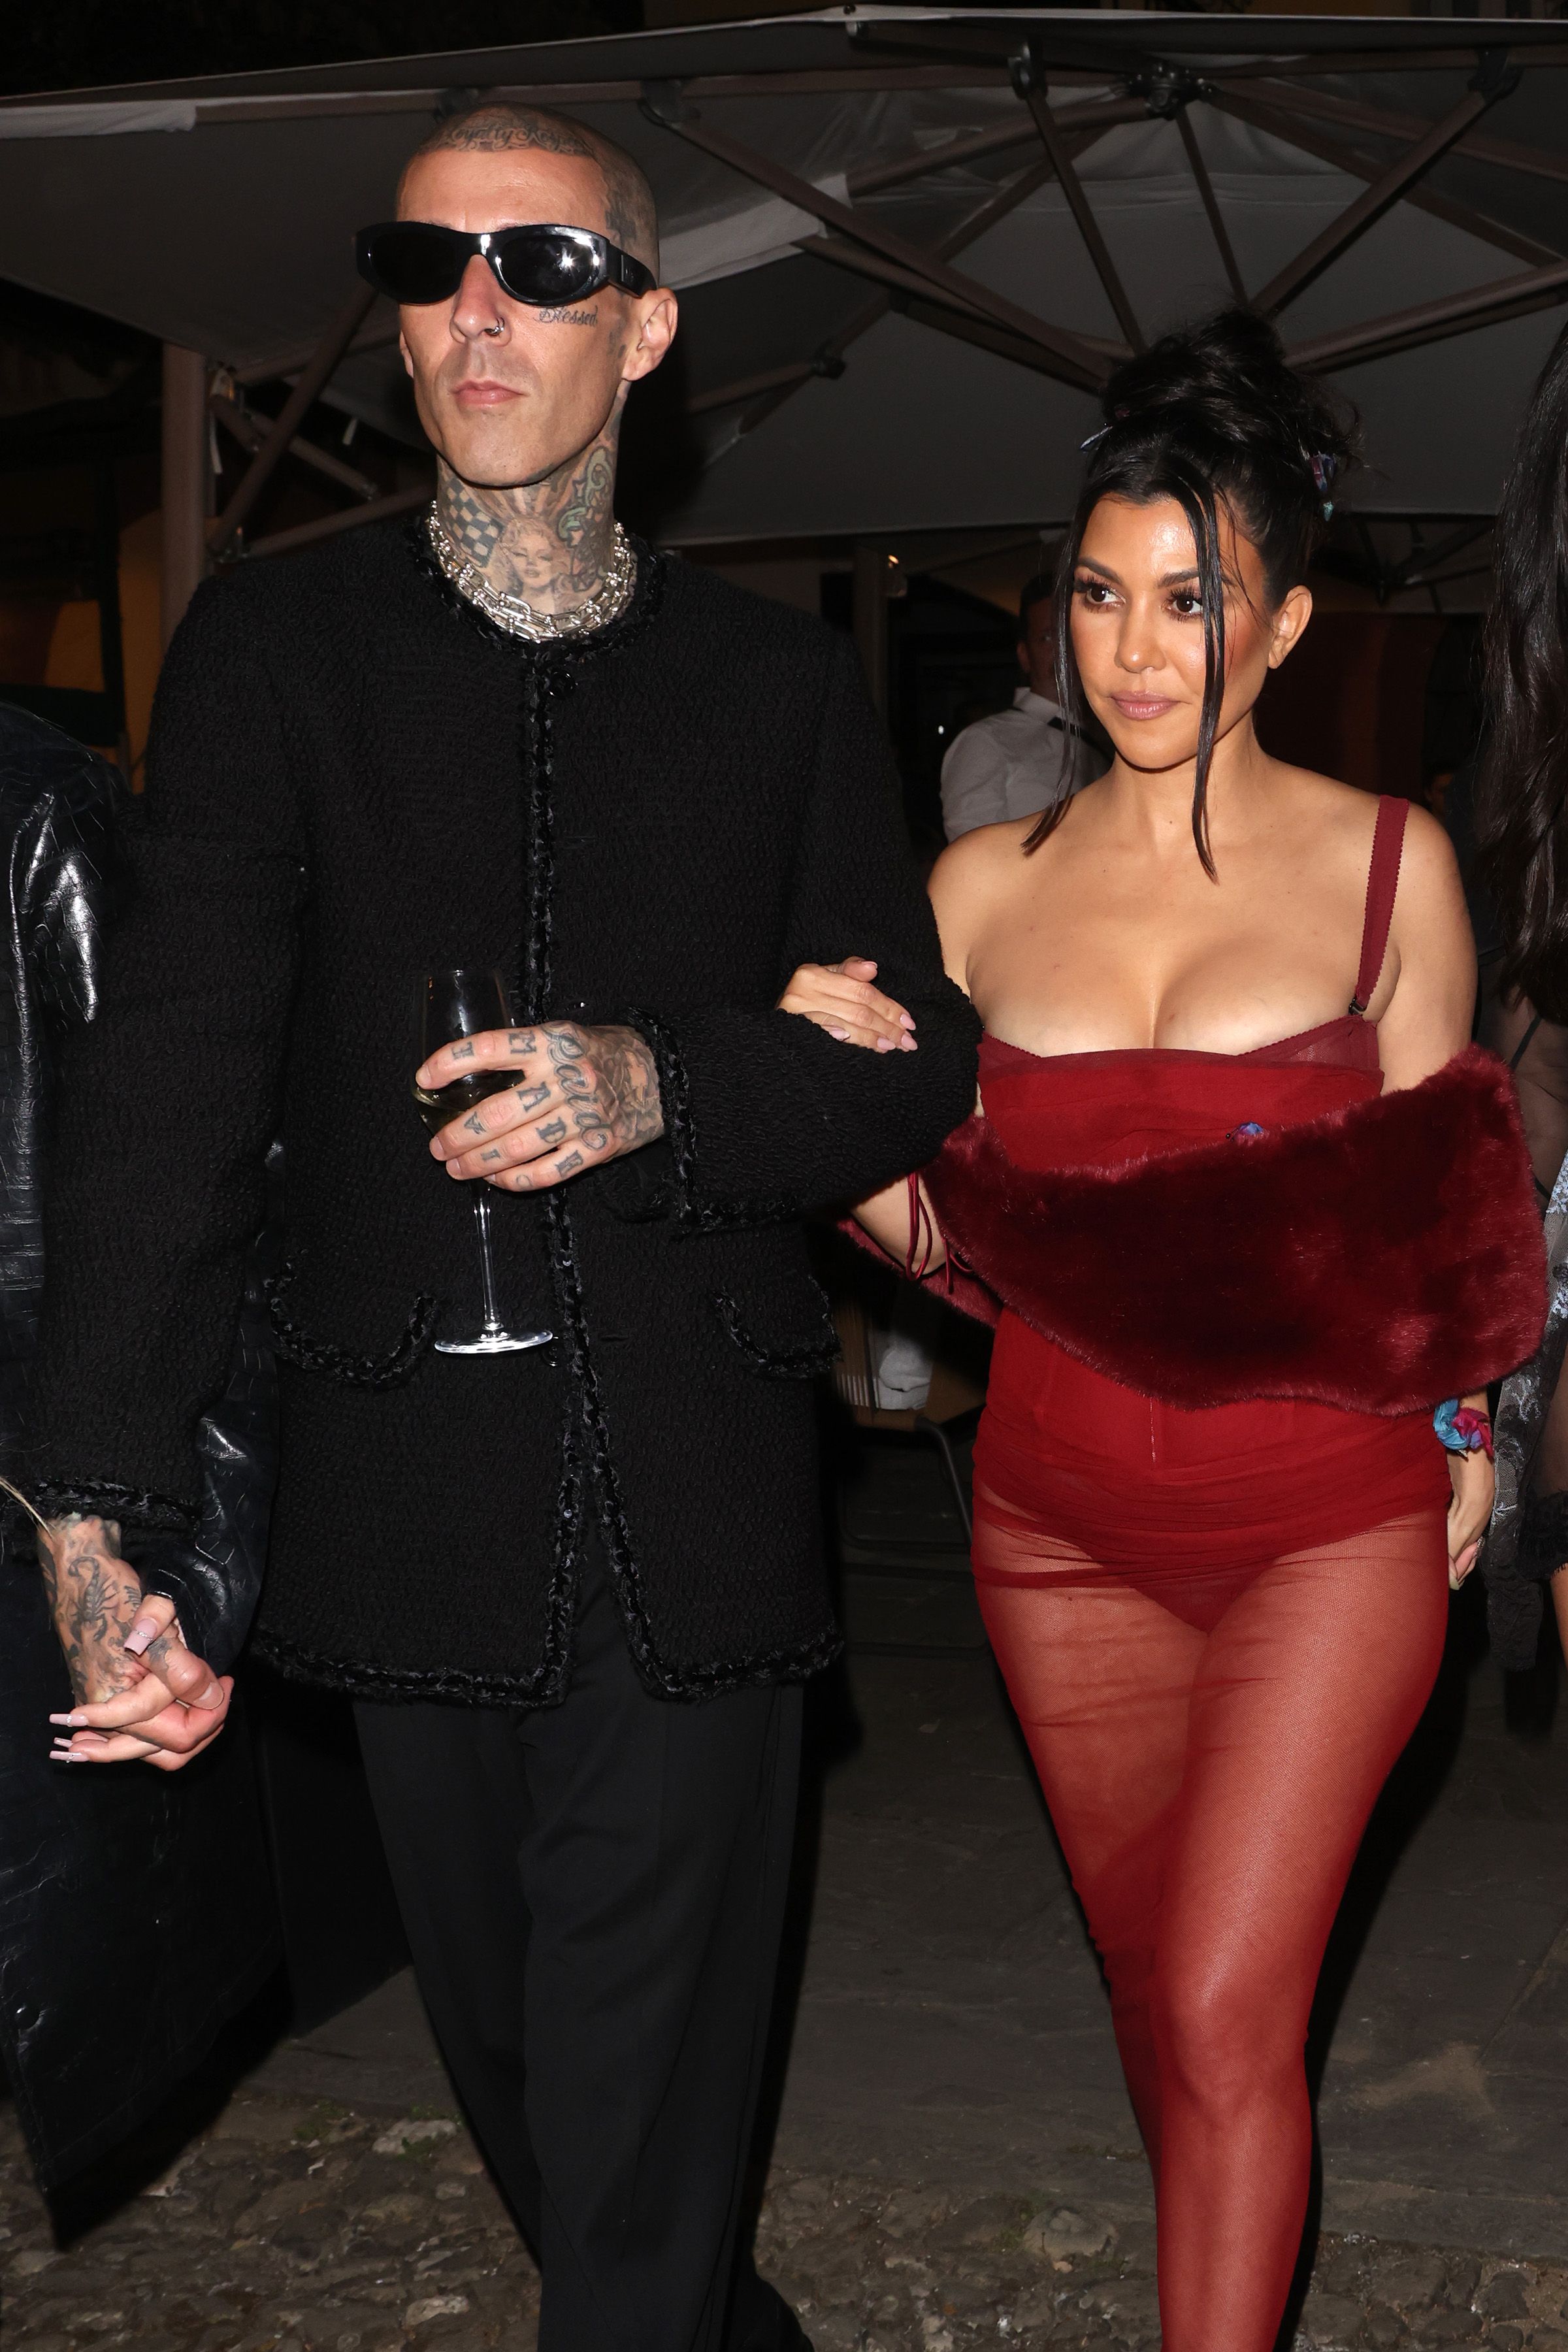 Kourtney Kardashian and Travis Barker criticised by fans over Insta post